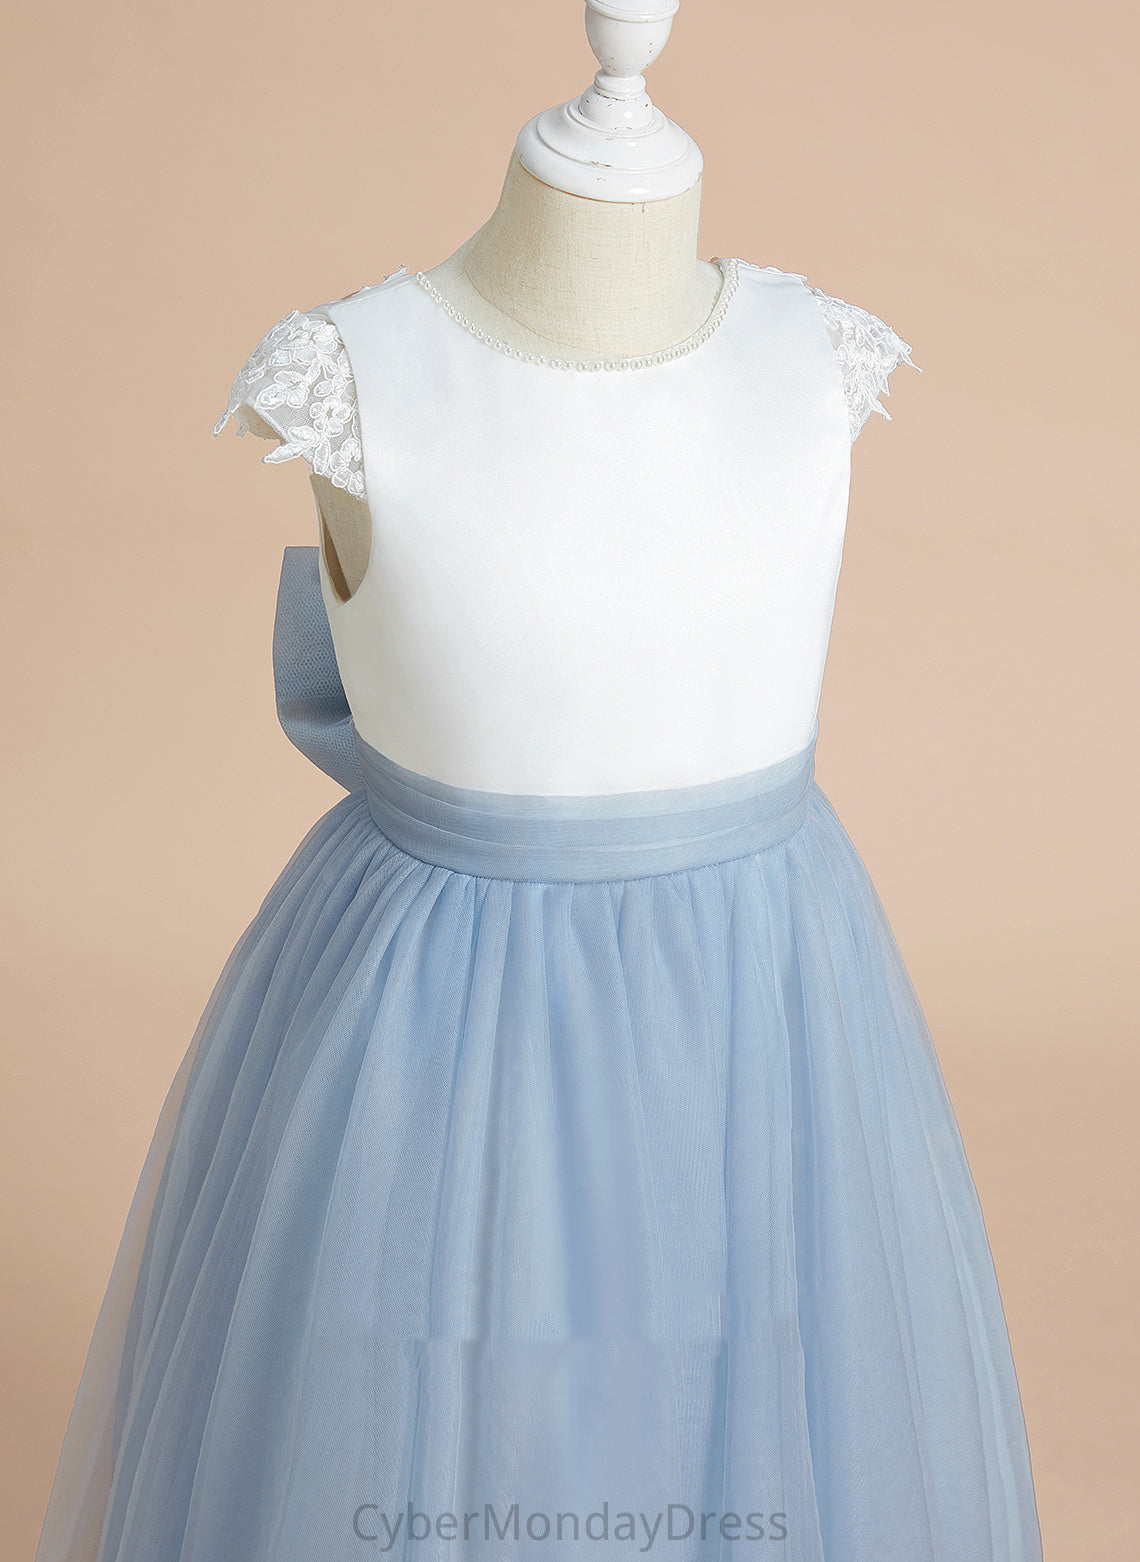 Flower Girl Dresses Dress Marcie Scoop - Sleeveless Tea-length Neck Lace/Bow(s) Flower A-Line With Girl Satin/Tulle